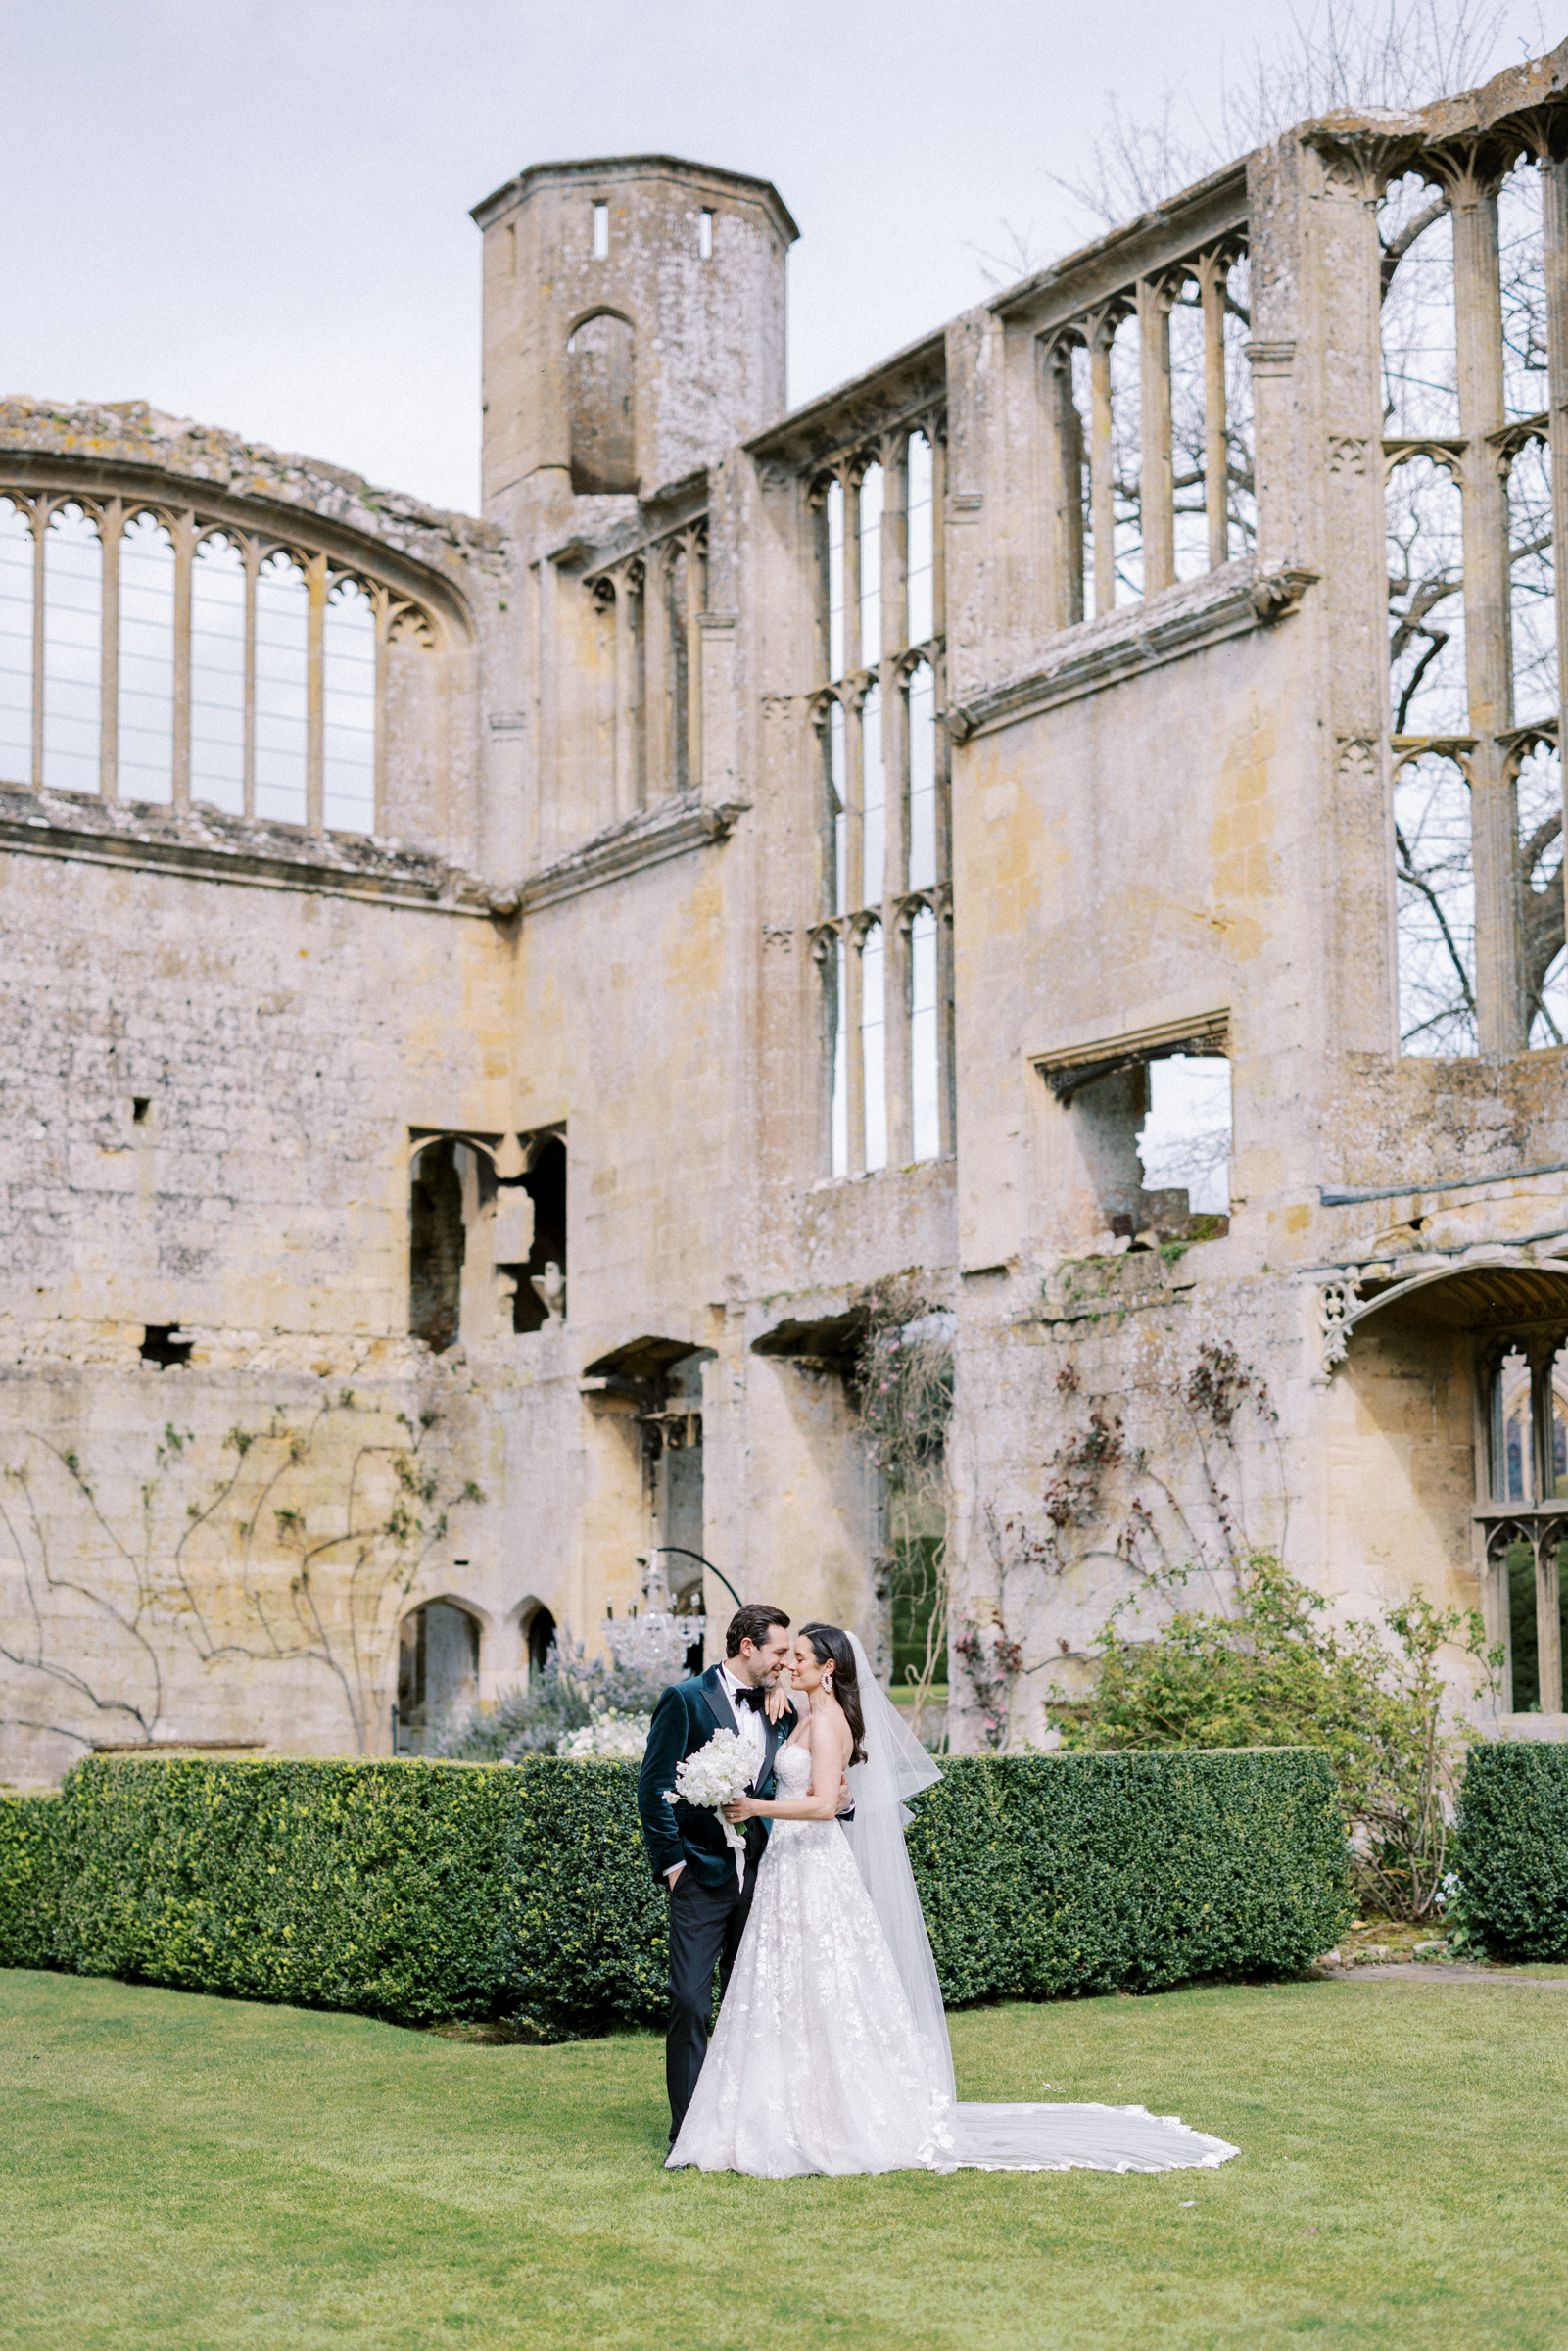 Sudeley Castle Wedding Couple have their wedding photographs taken within the castle walls